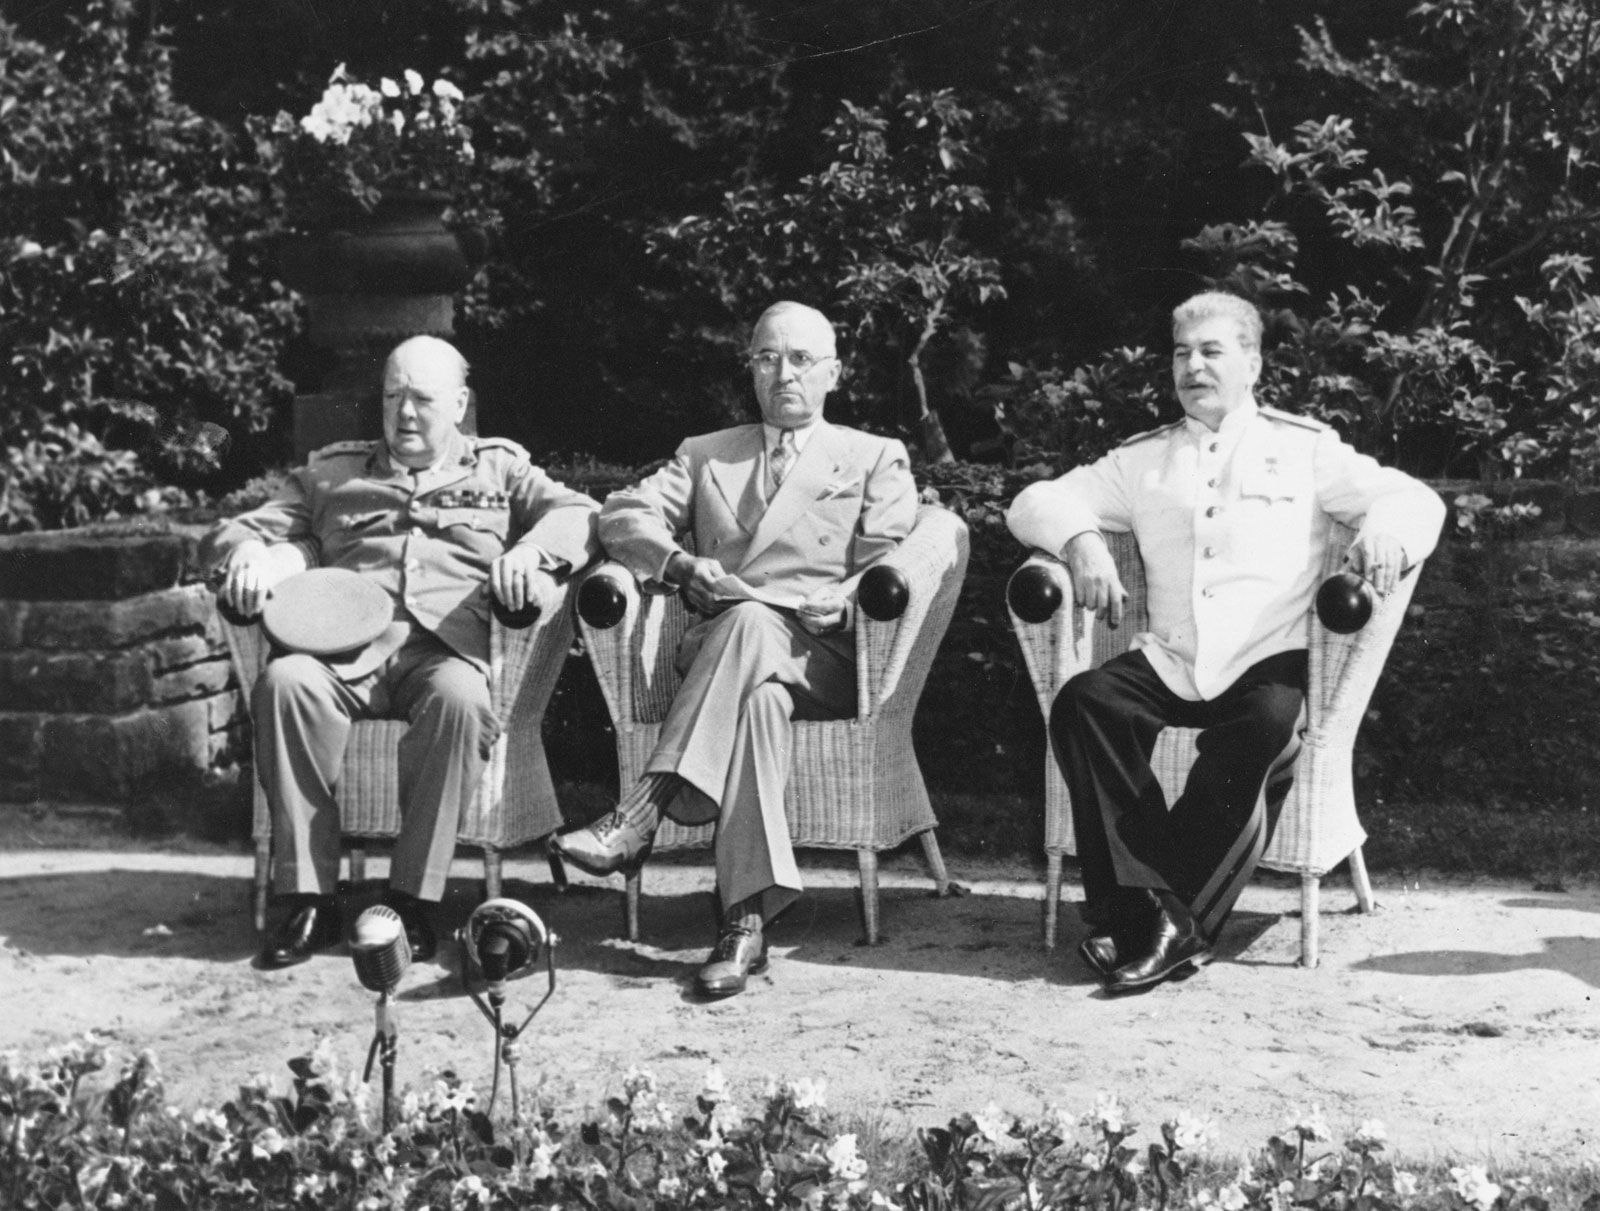 In July 1945, to discuss the postwar order in Europe, there was a historic meeting among Winston Churchill (British Prime Minister), Harry S. Truman (U.S. Pres.), and Joseph Stalin (Soviet Premier). 
